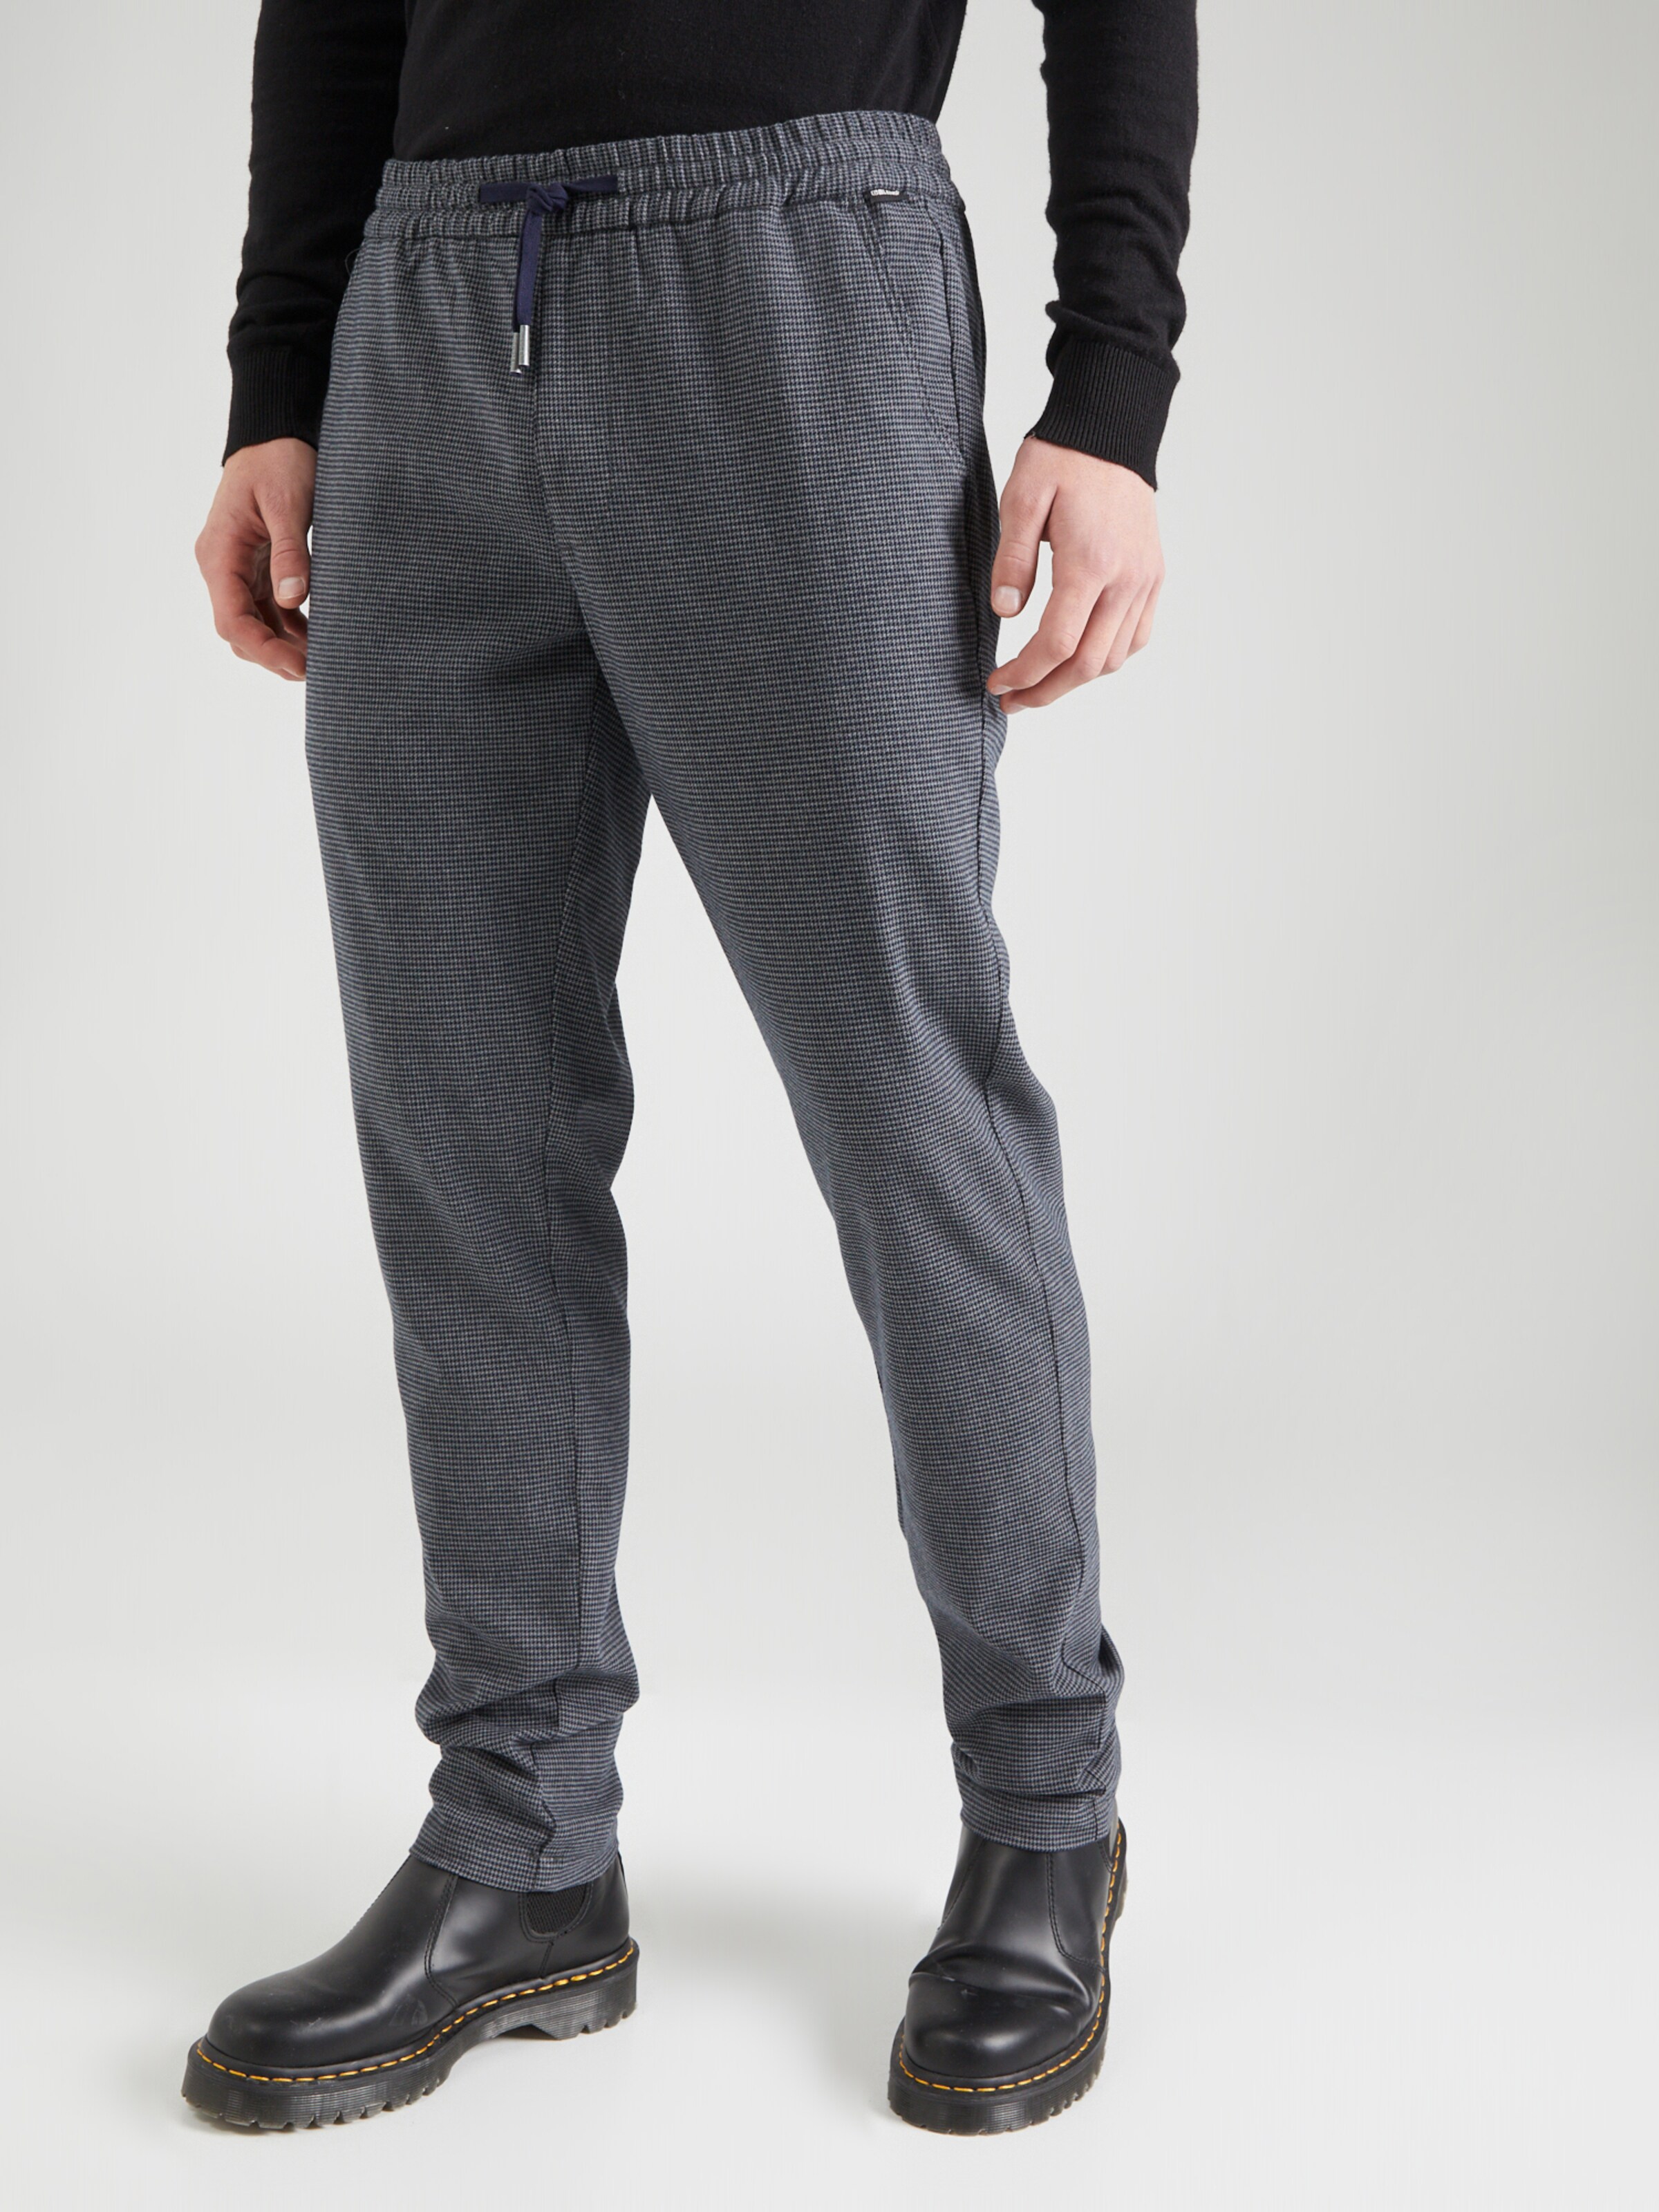 Buy Olive Trousers & Pants for Men by JOHN PLAYERS Online | Ajio.com